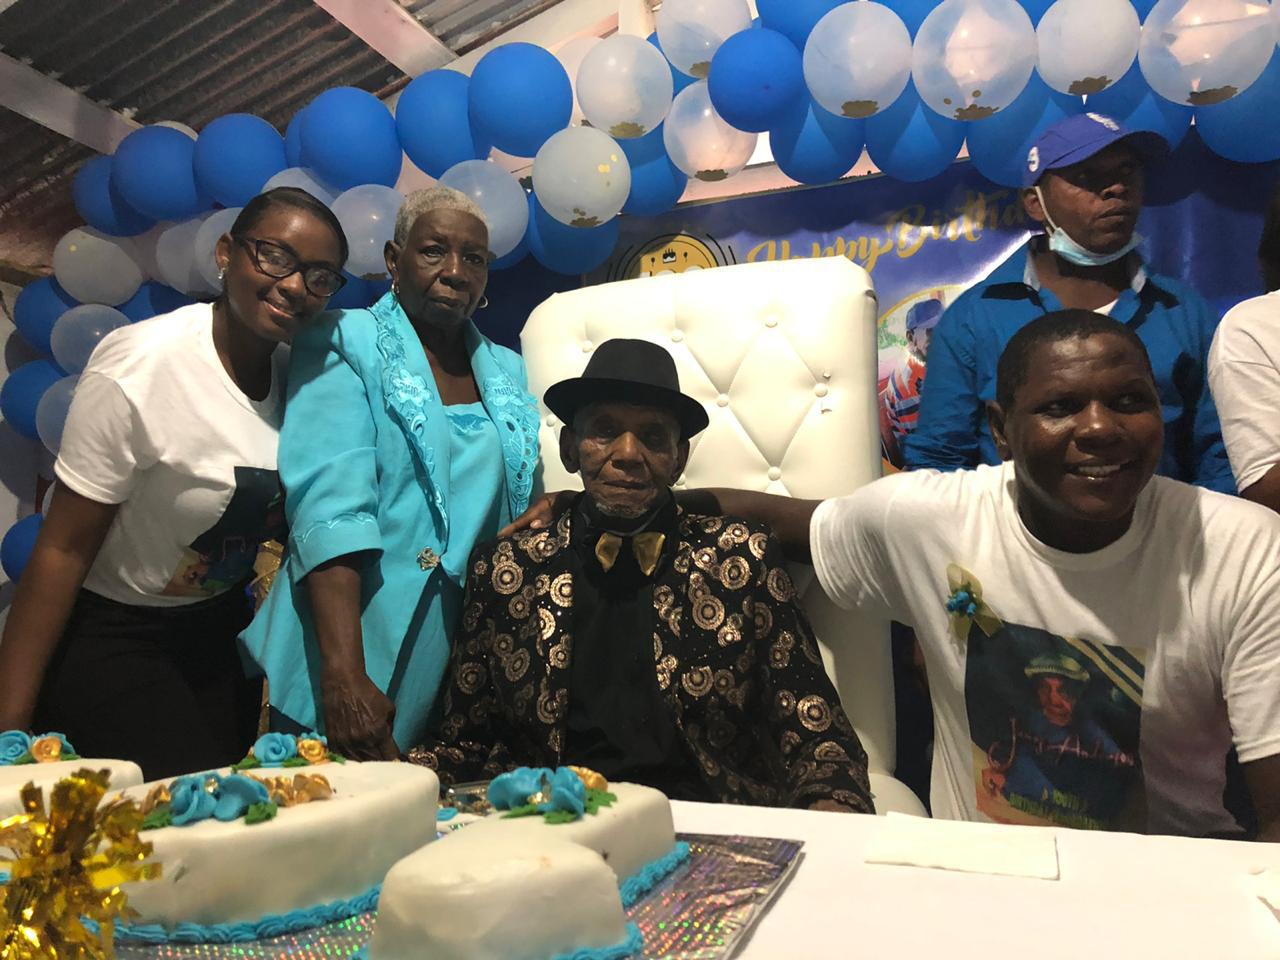 James Anderson and his daughter Pam (left) and other relatives during his birthday celebration at Punters Place